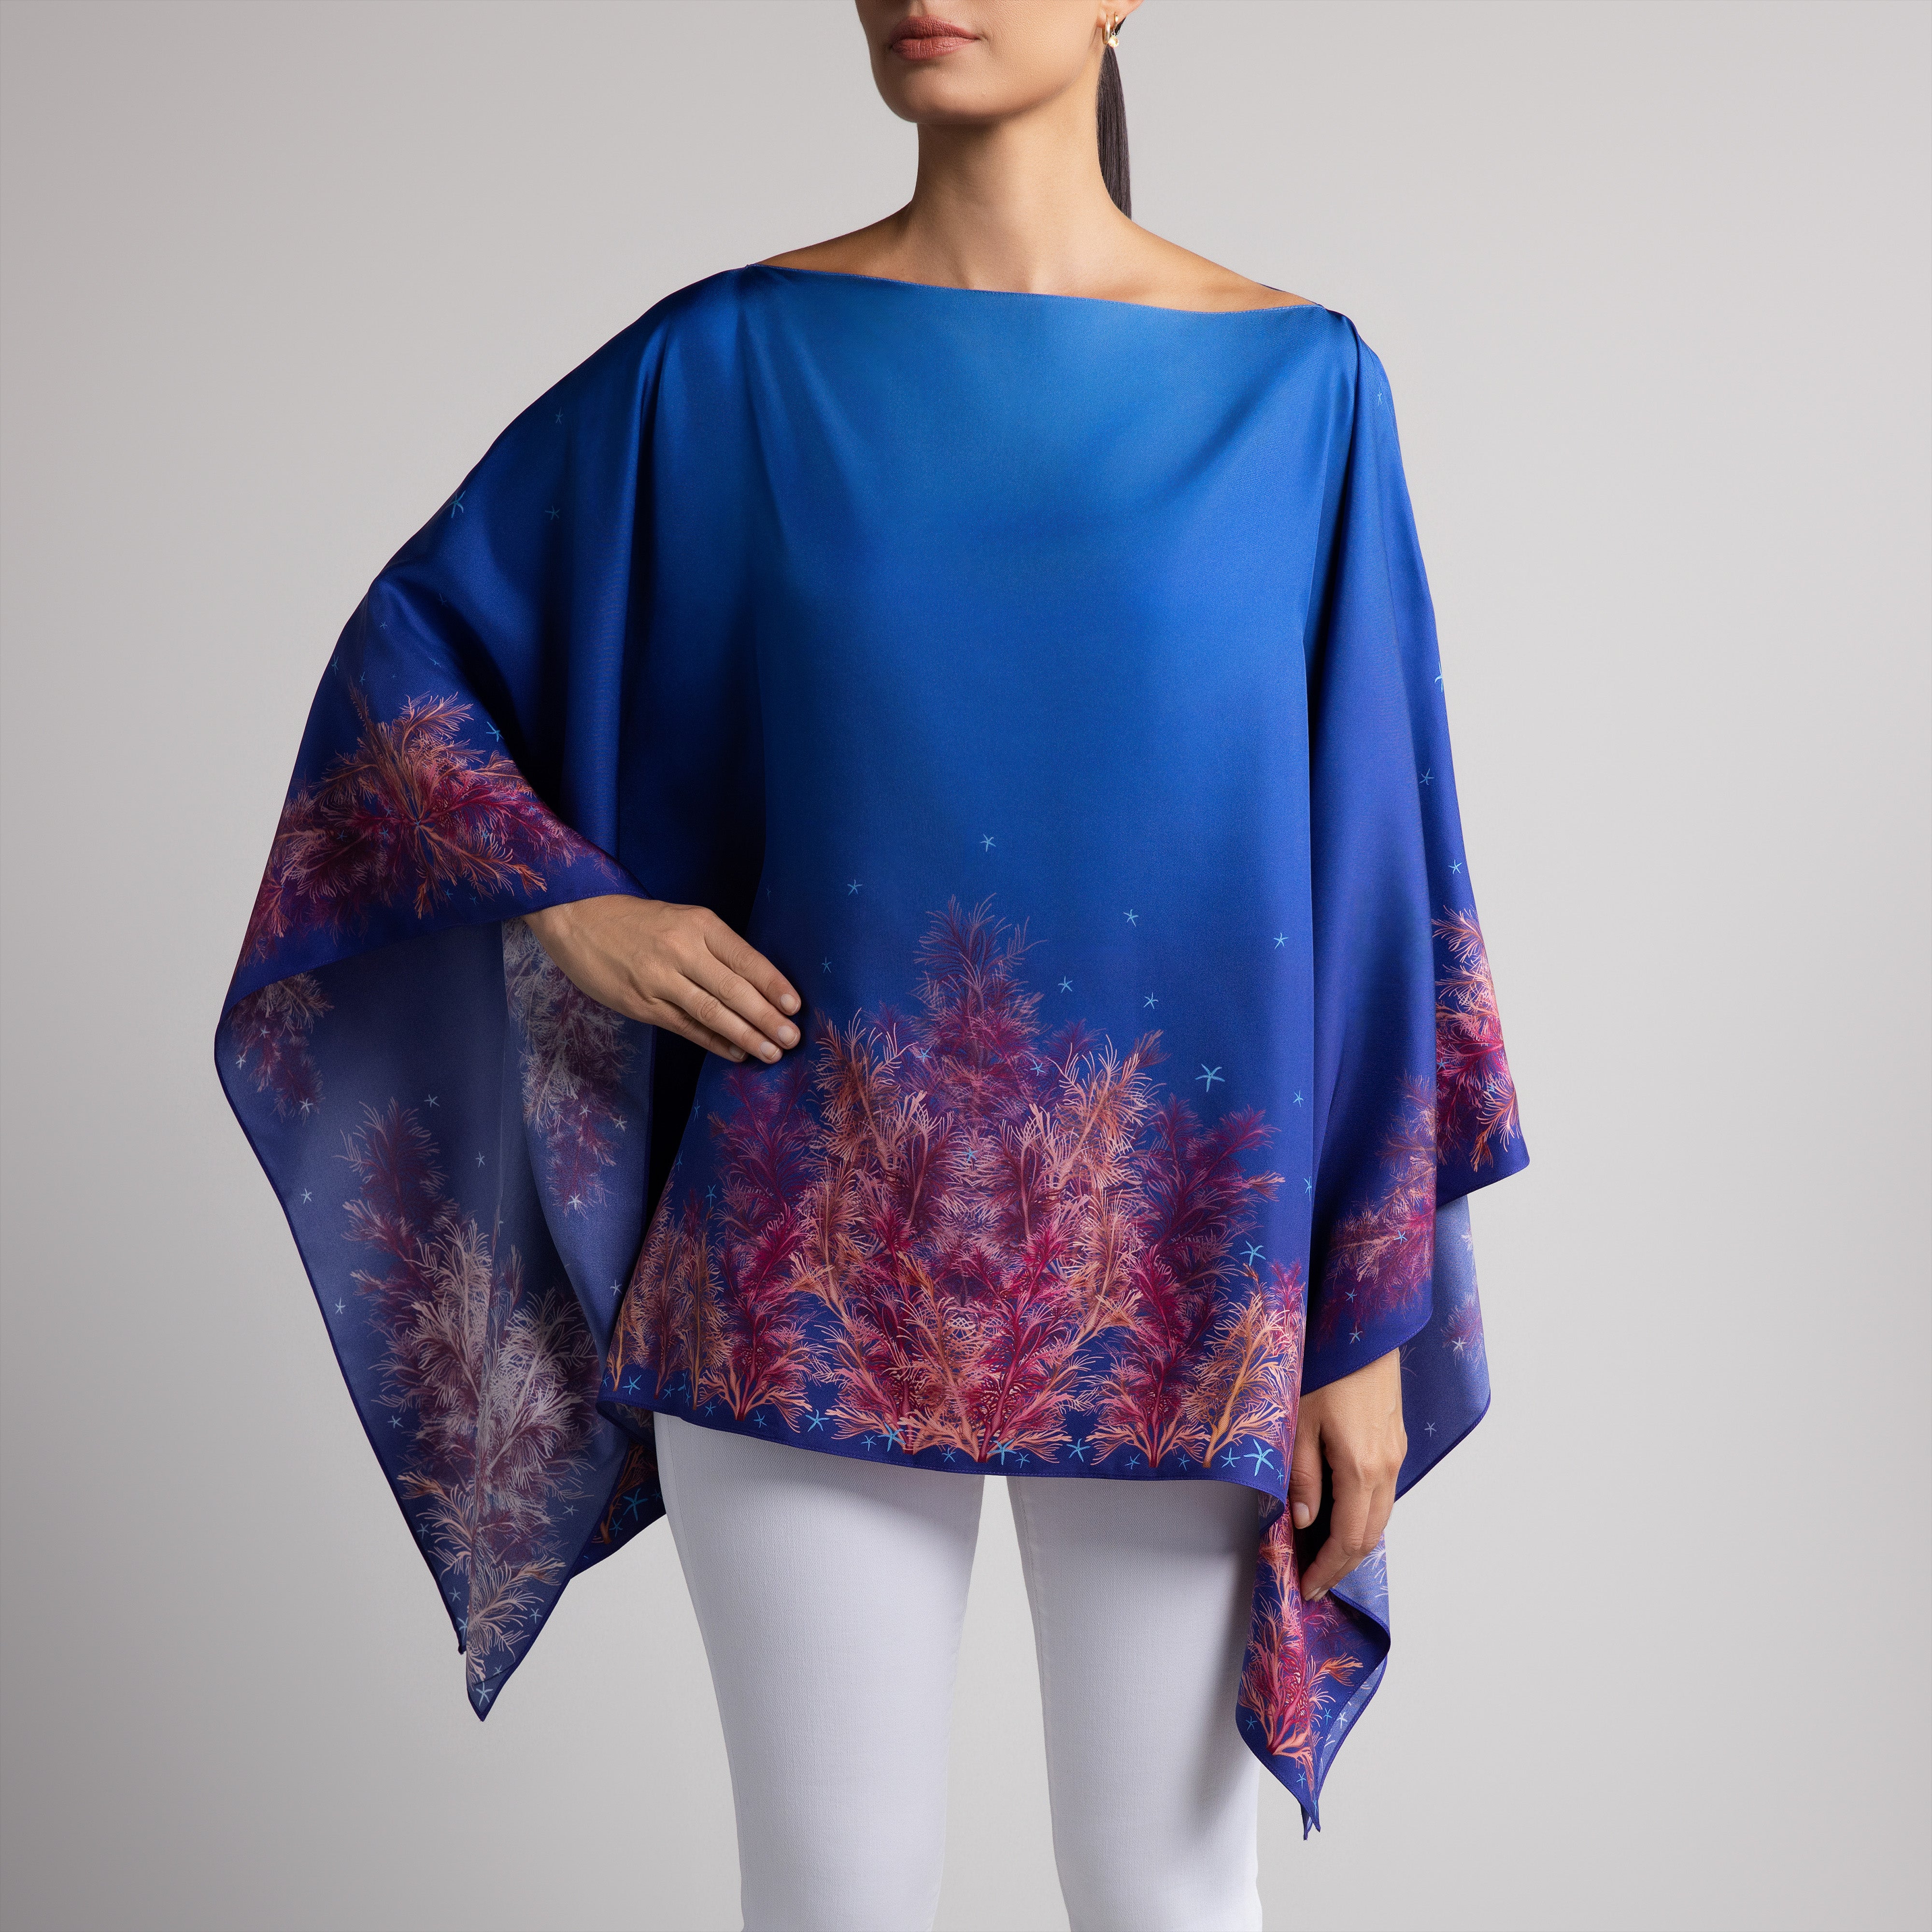 Galapagos Silk Poncho in Blue Ombré